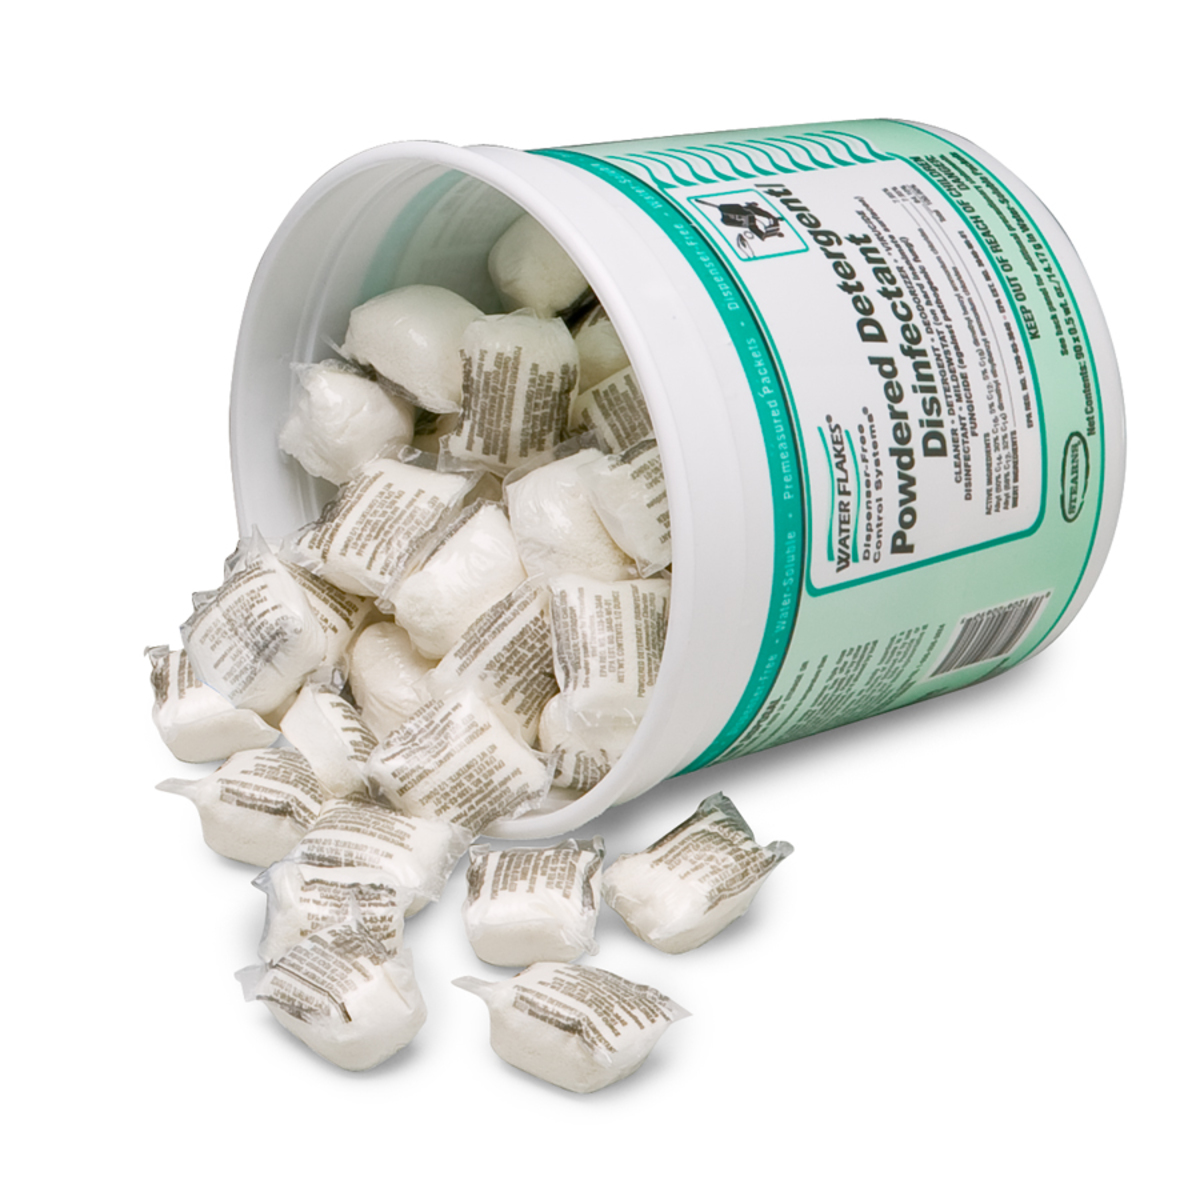 Allegro® Dry Soap For All Respirators (Availability restrictions apply.)